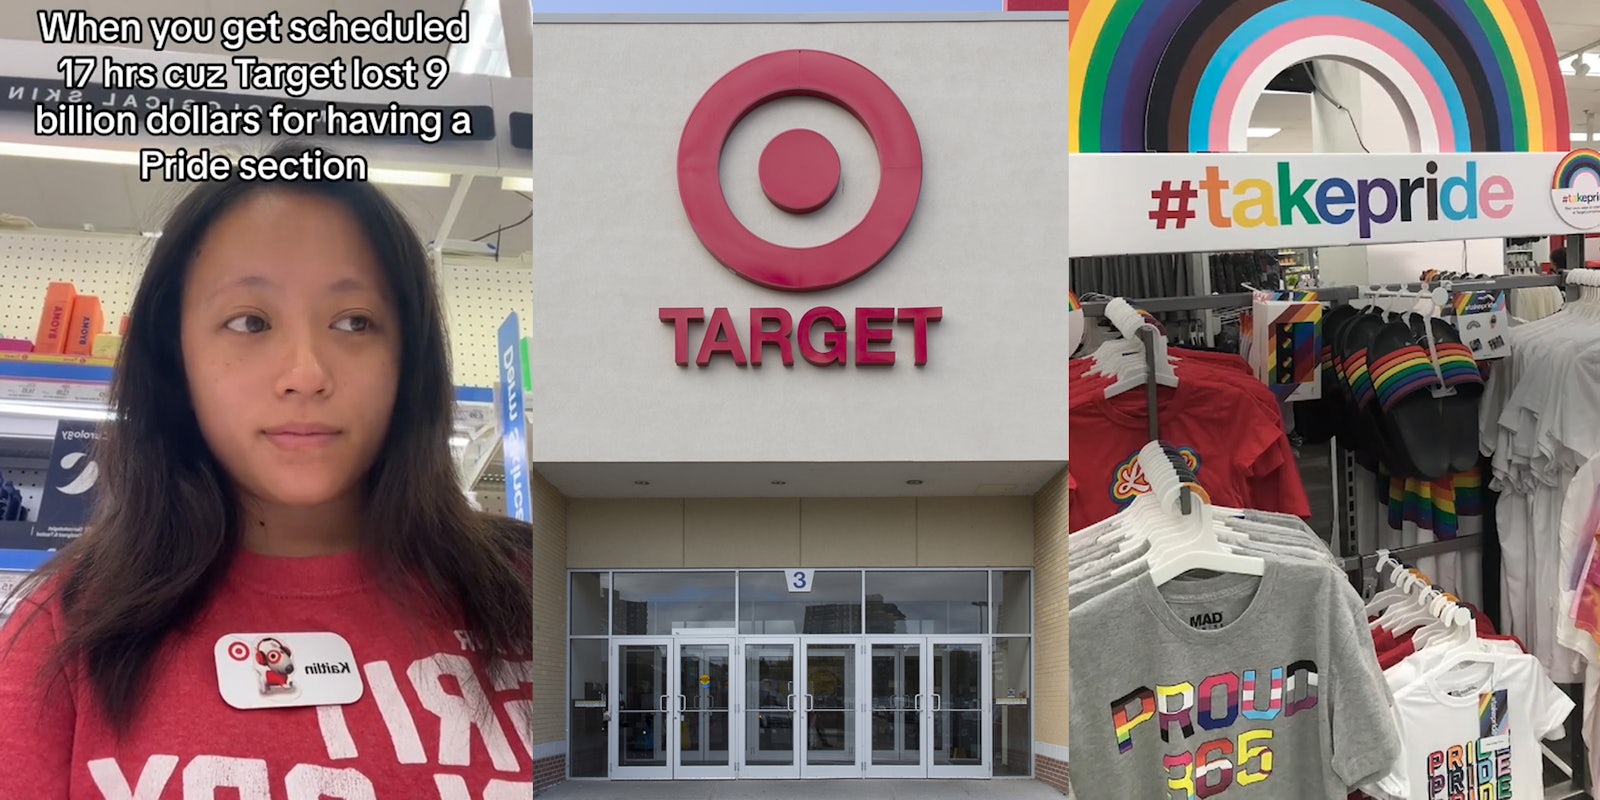 Target employee with caption 'When you get scheduled 17 hrs cuz Target lost 9 billion dollars for having a Pride section' (l) Target sign above building entrance (c) Target Pride section (r)